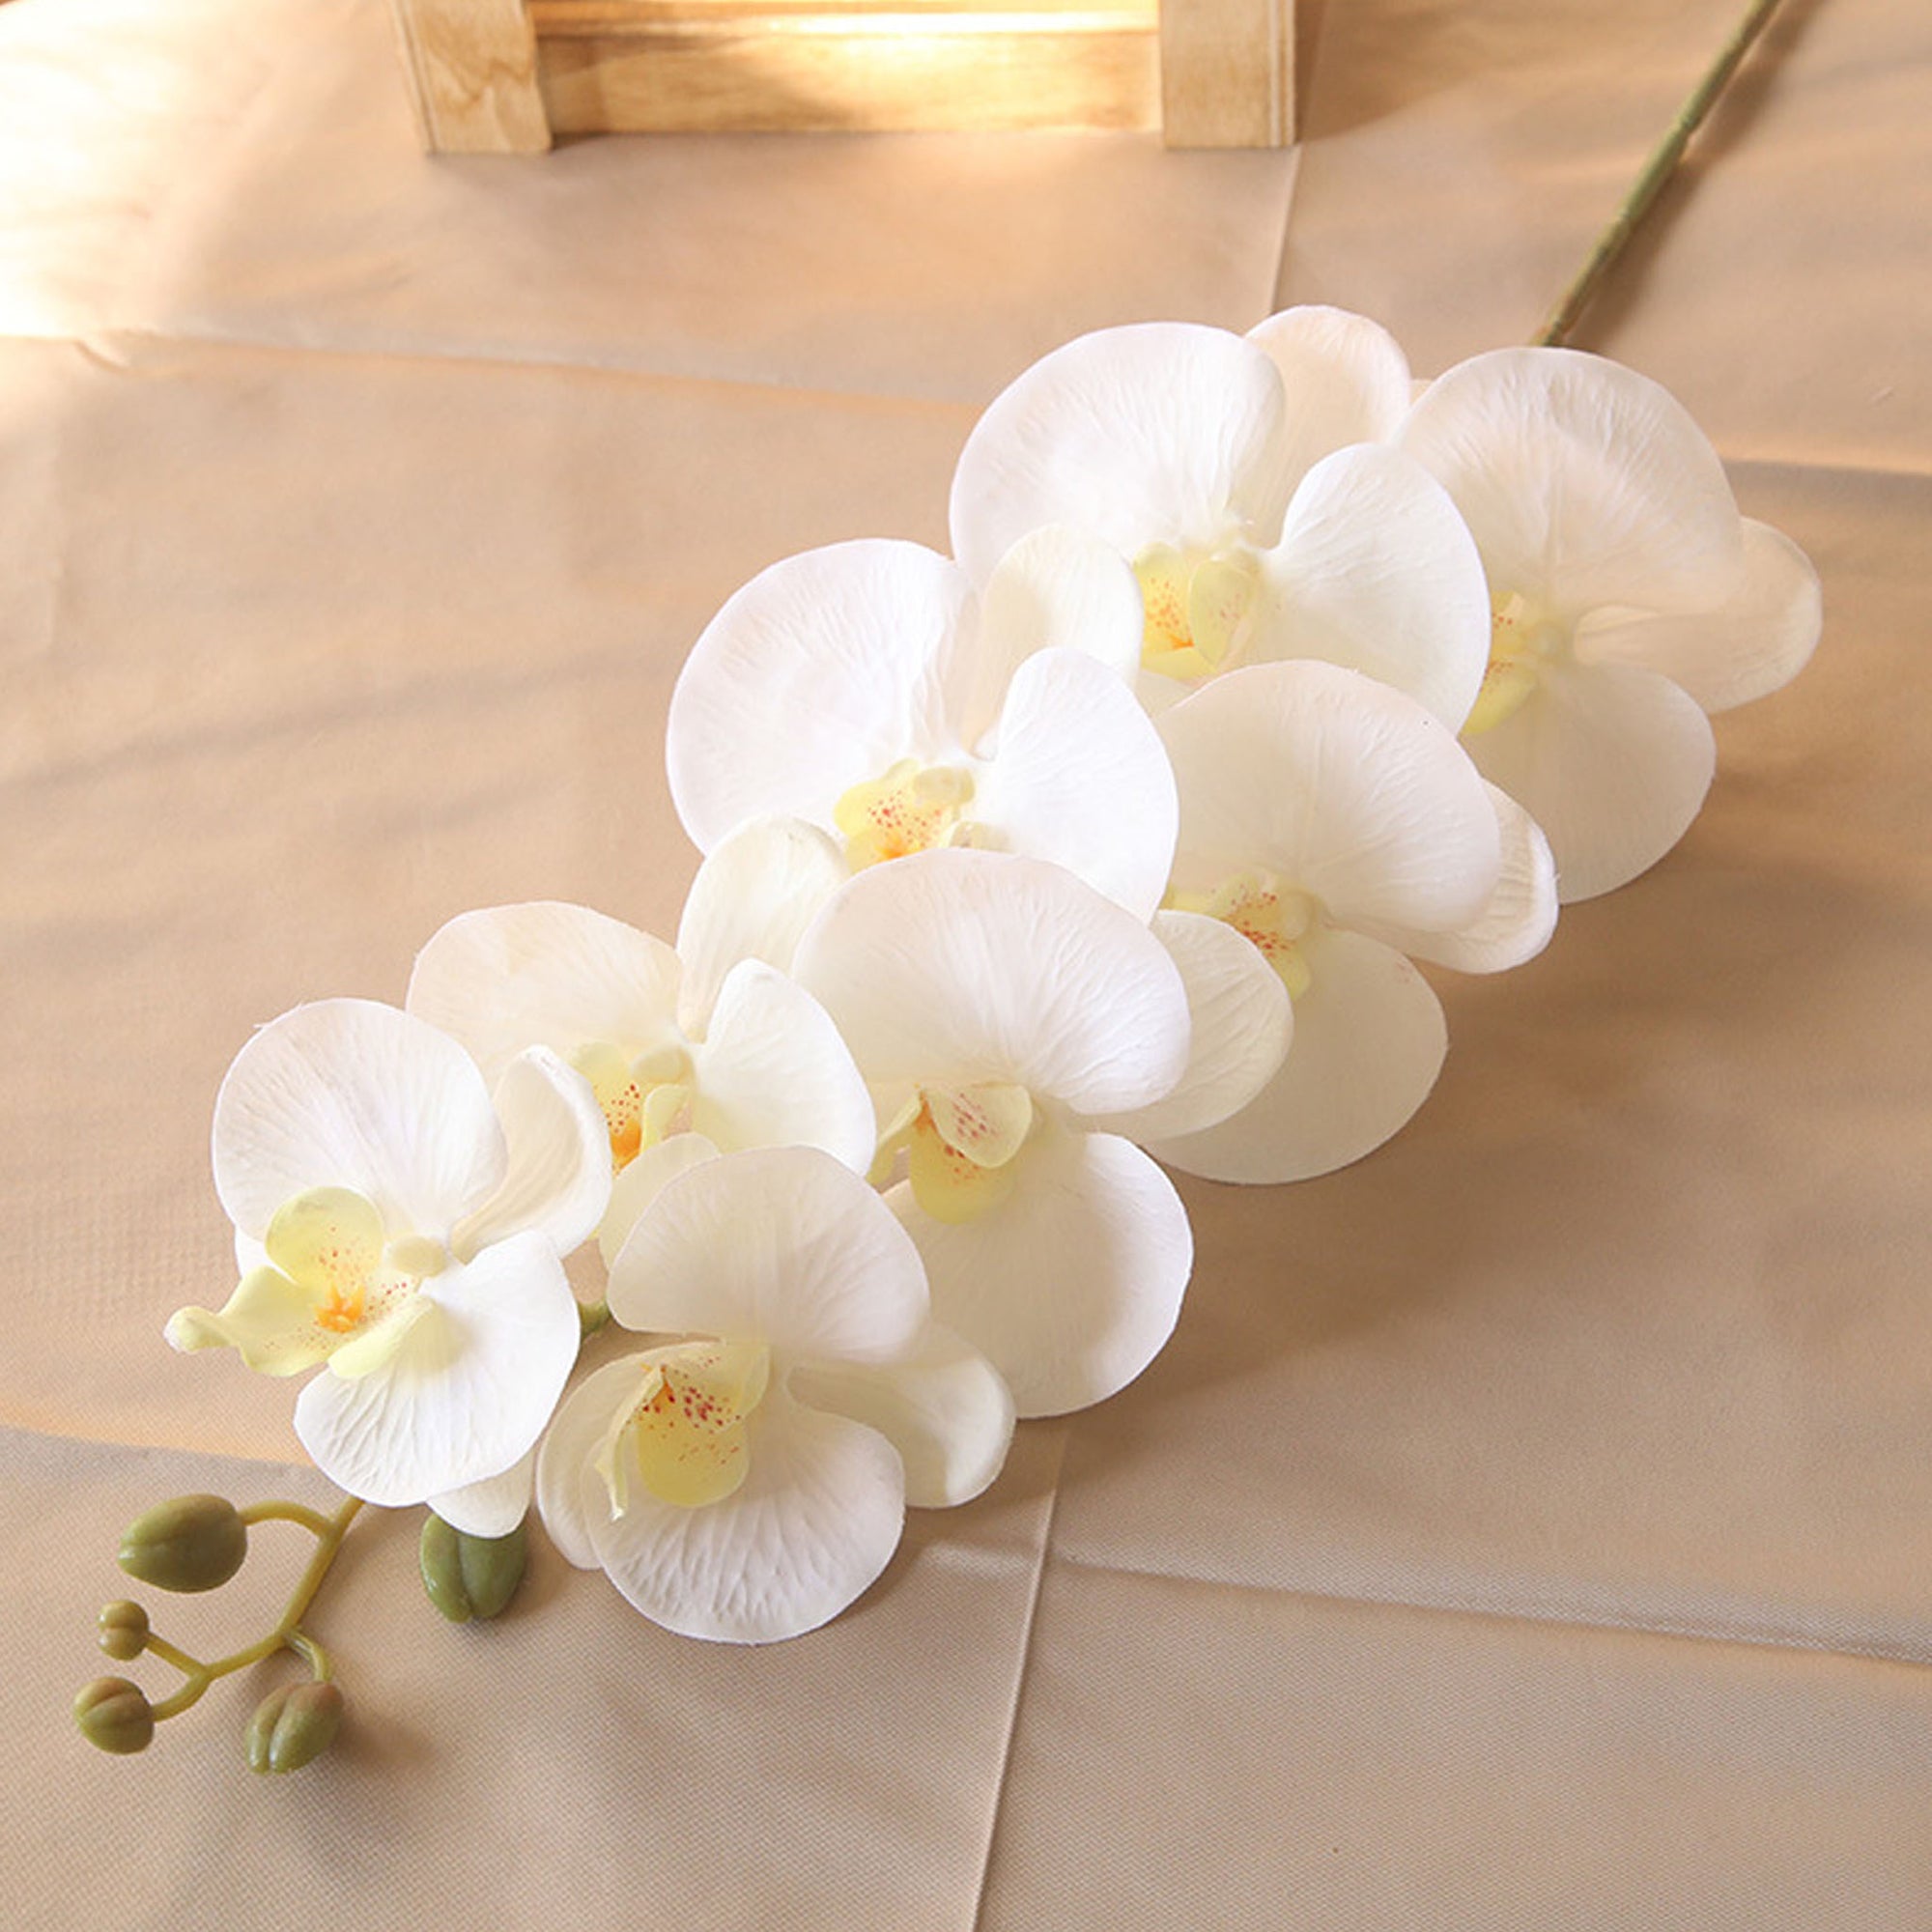 Artificial Orchid Flowers Realistic Phalaenopsis